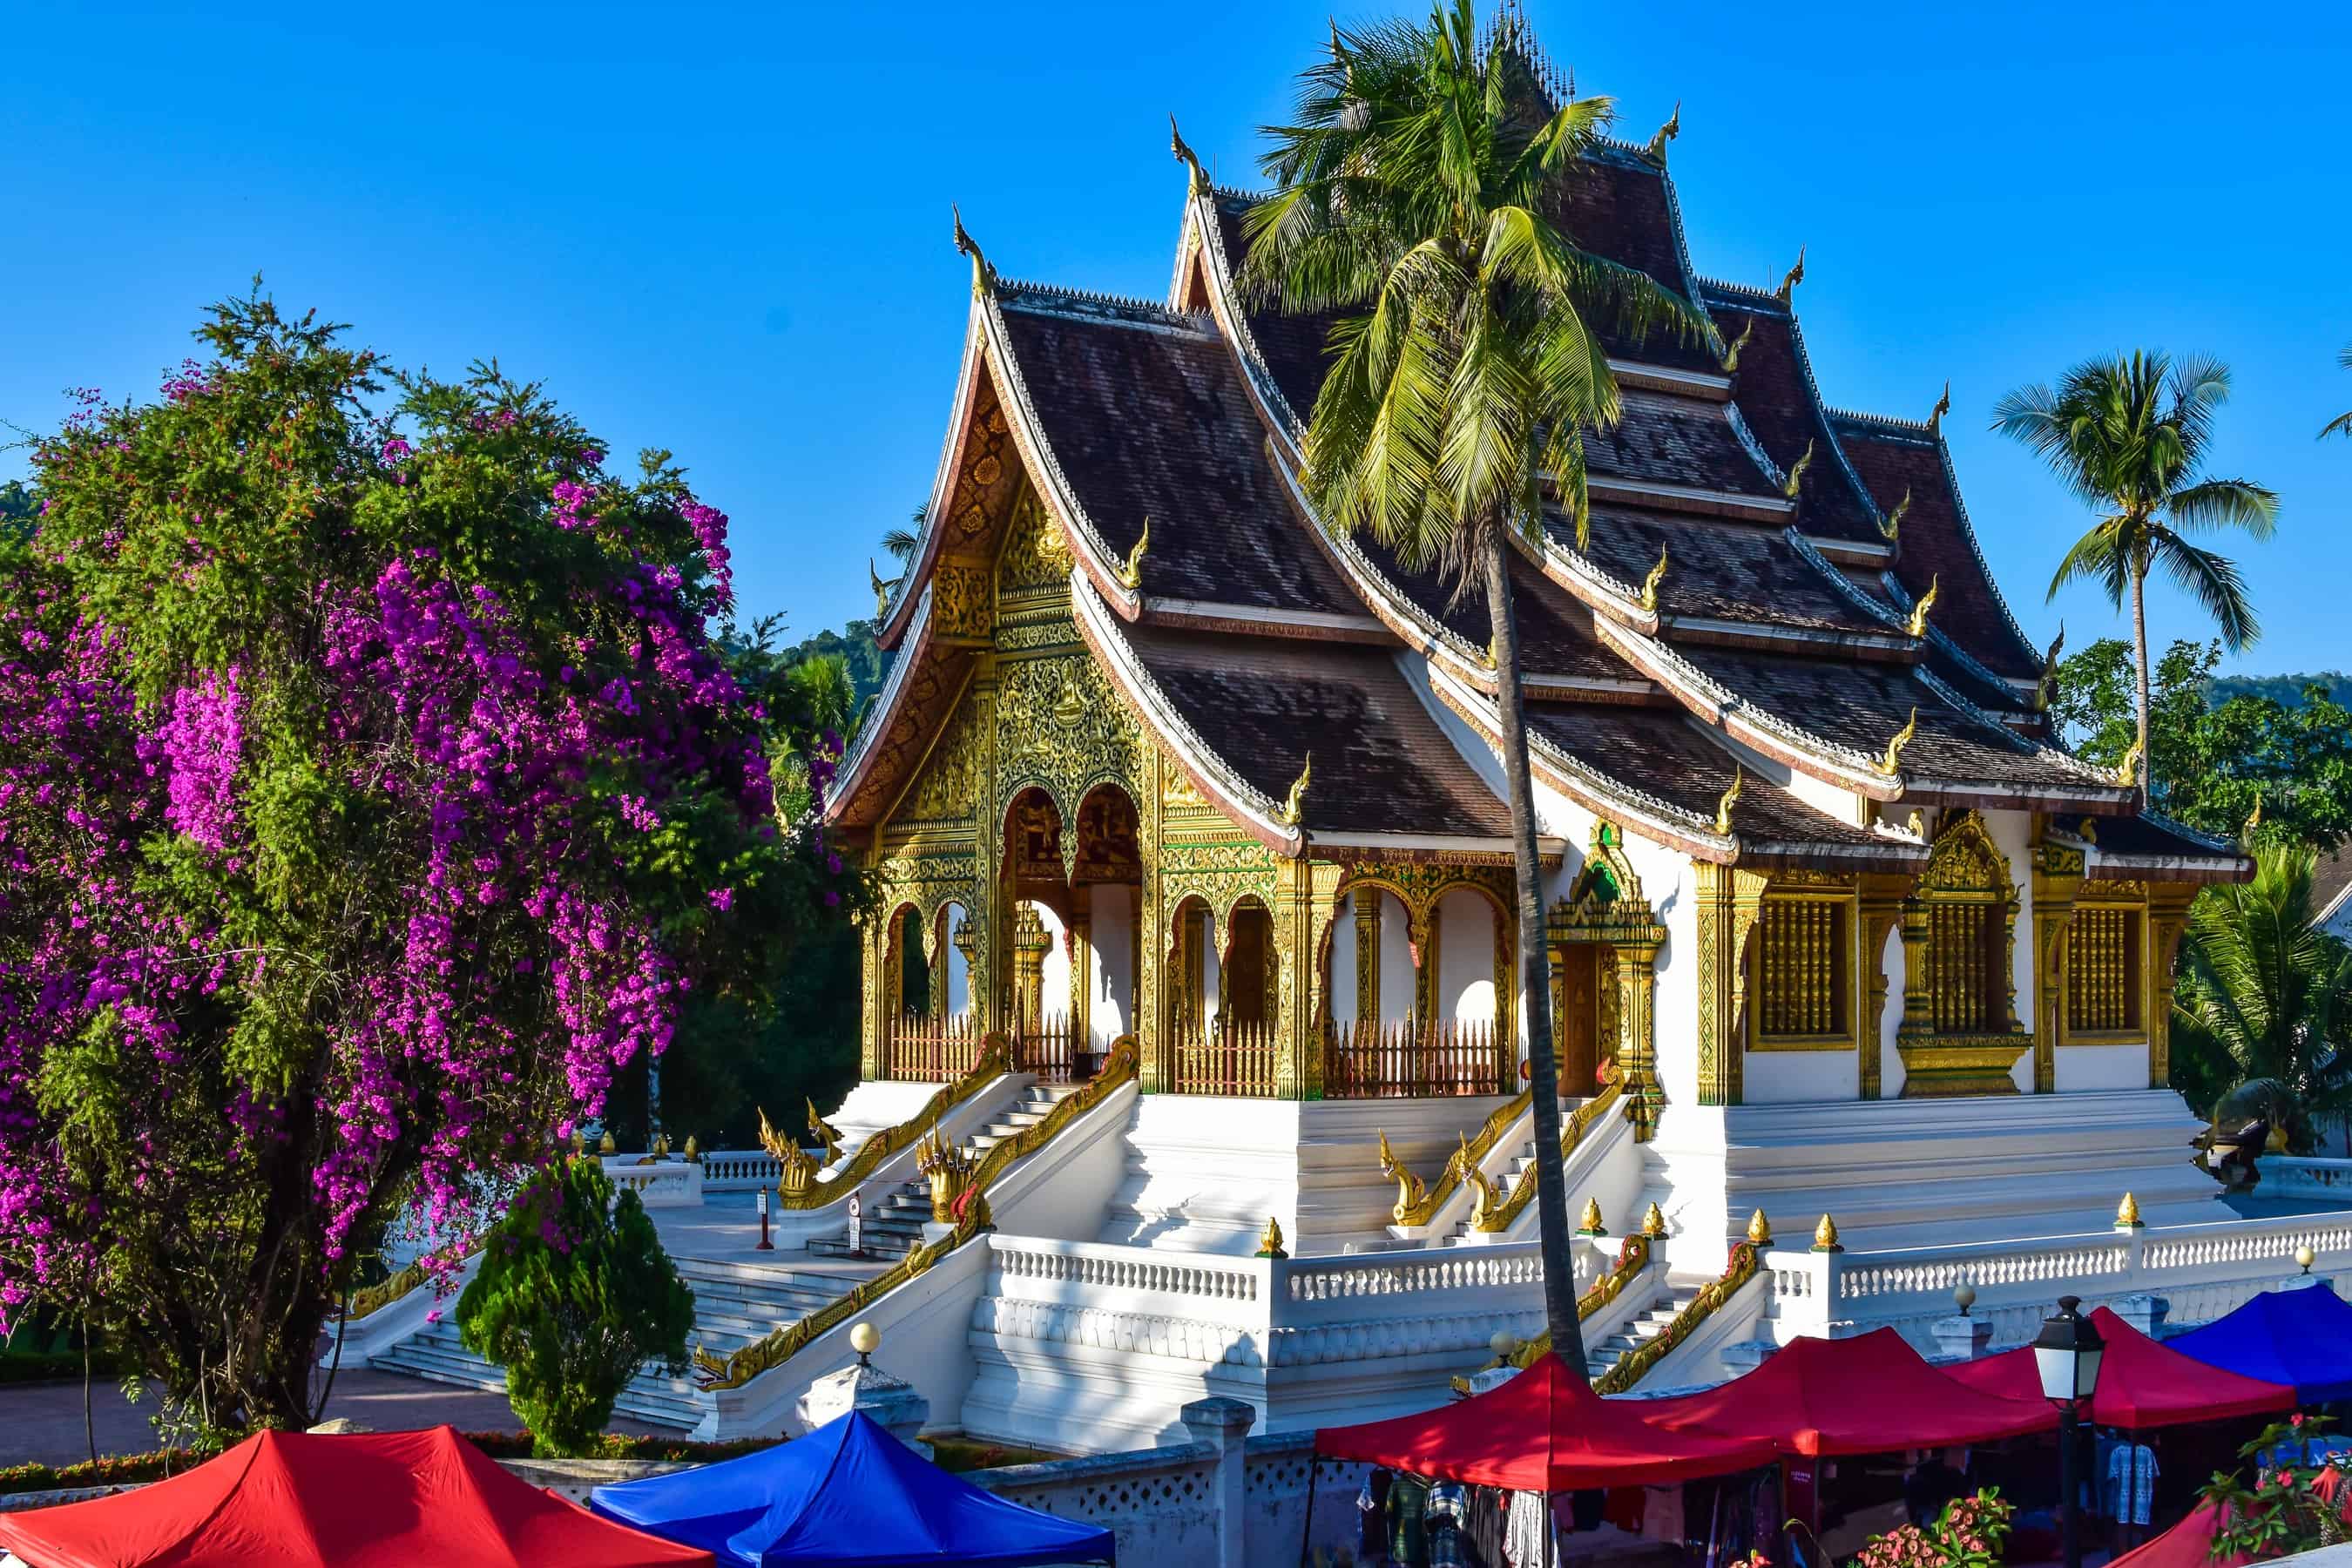 Visit the The Royal Palace Museum - Top Things to do in Luang Prabang in 2019